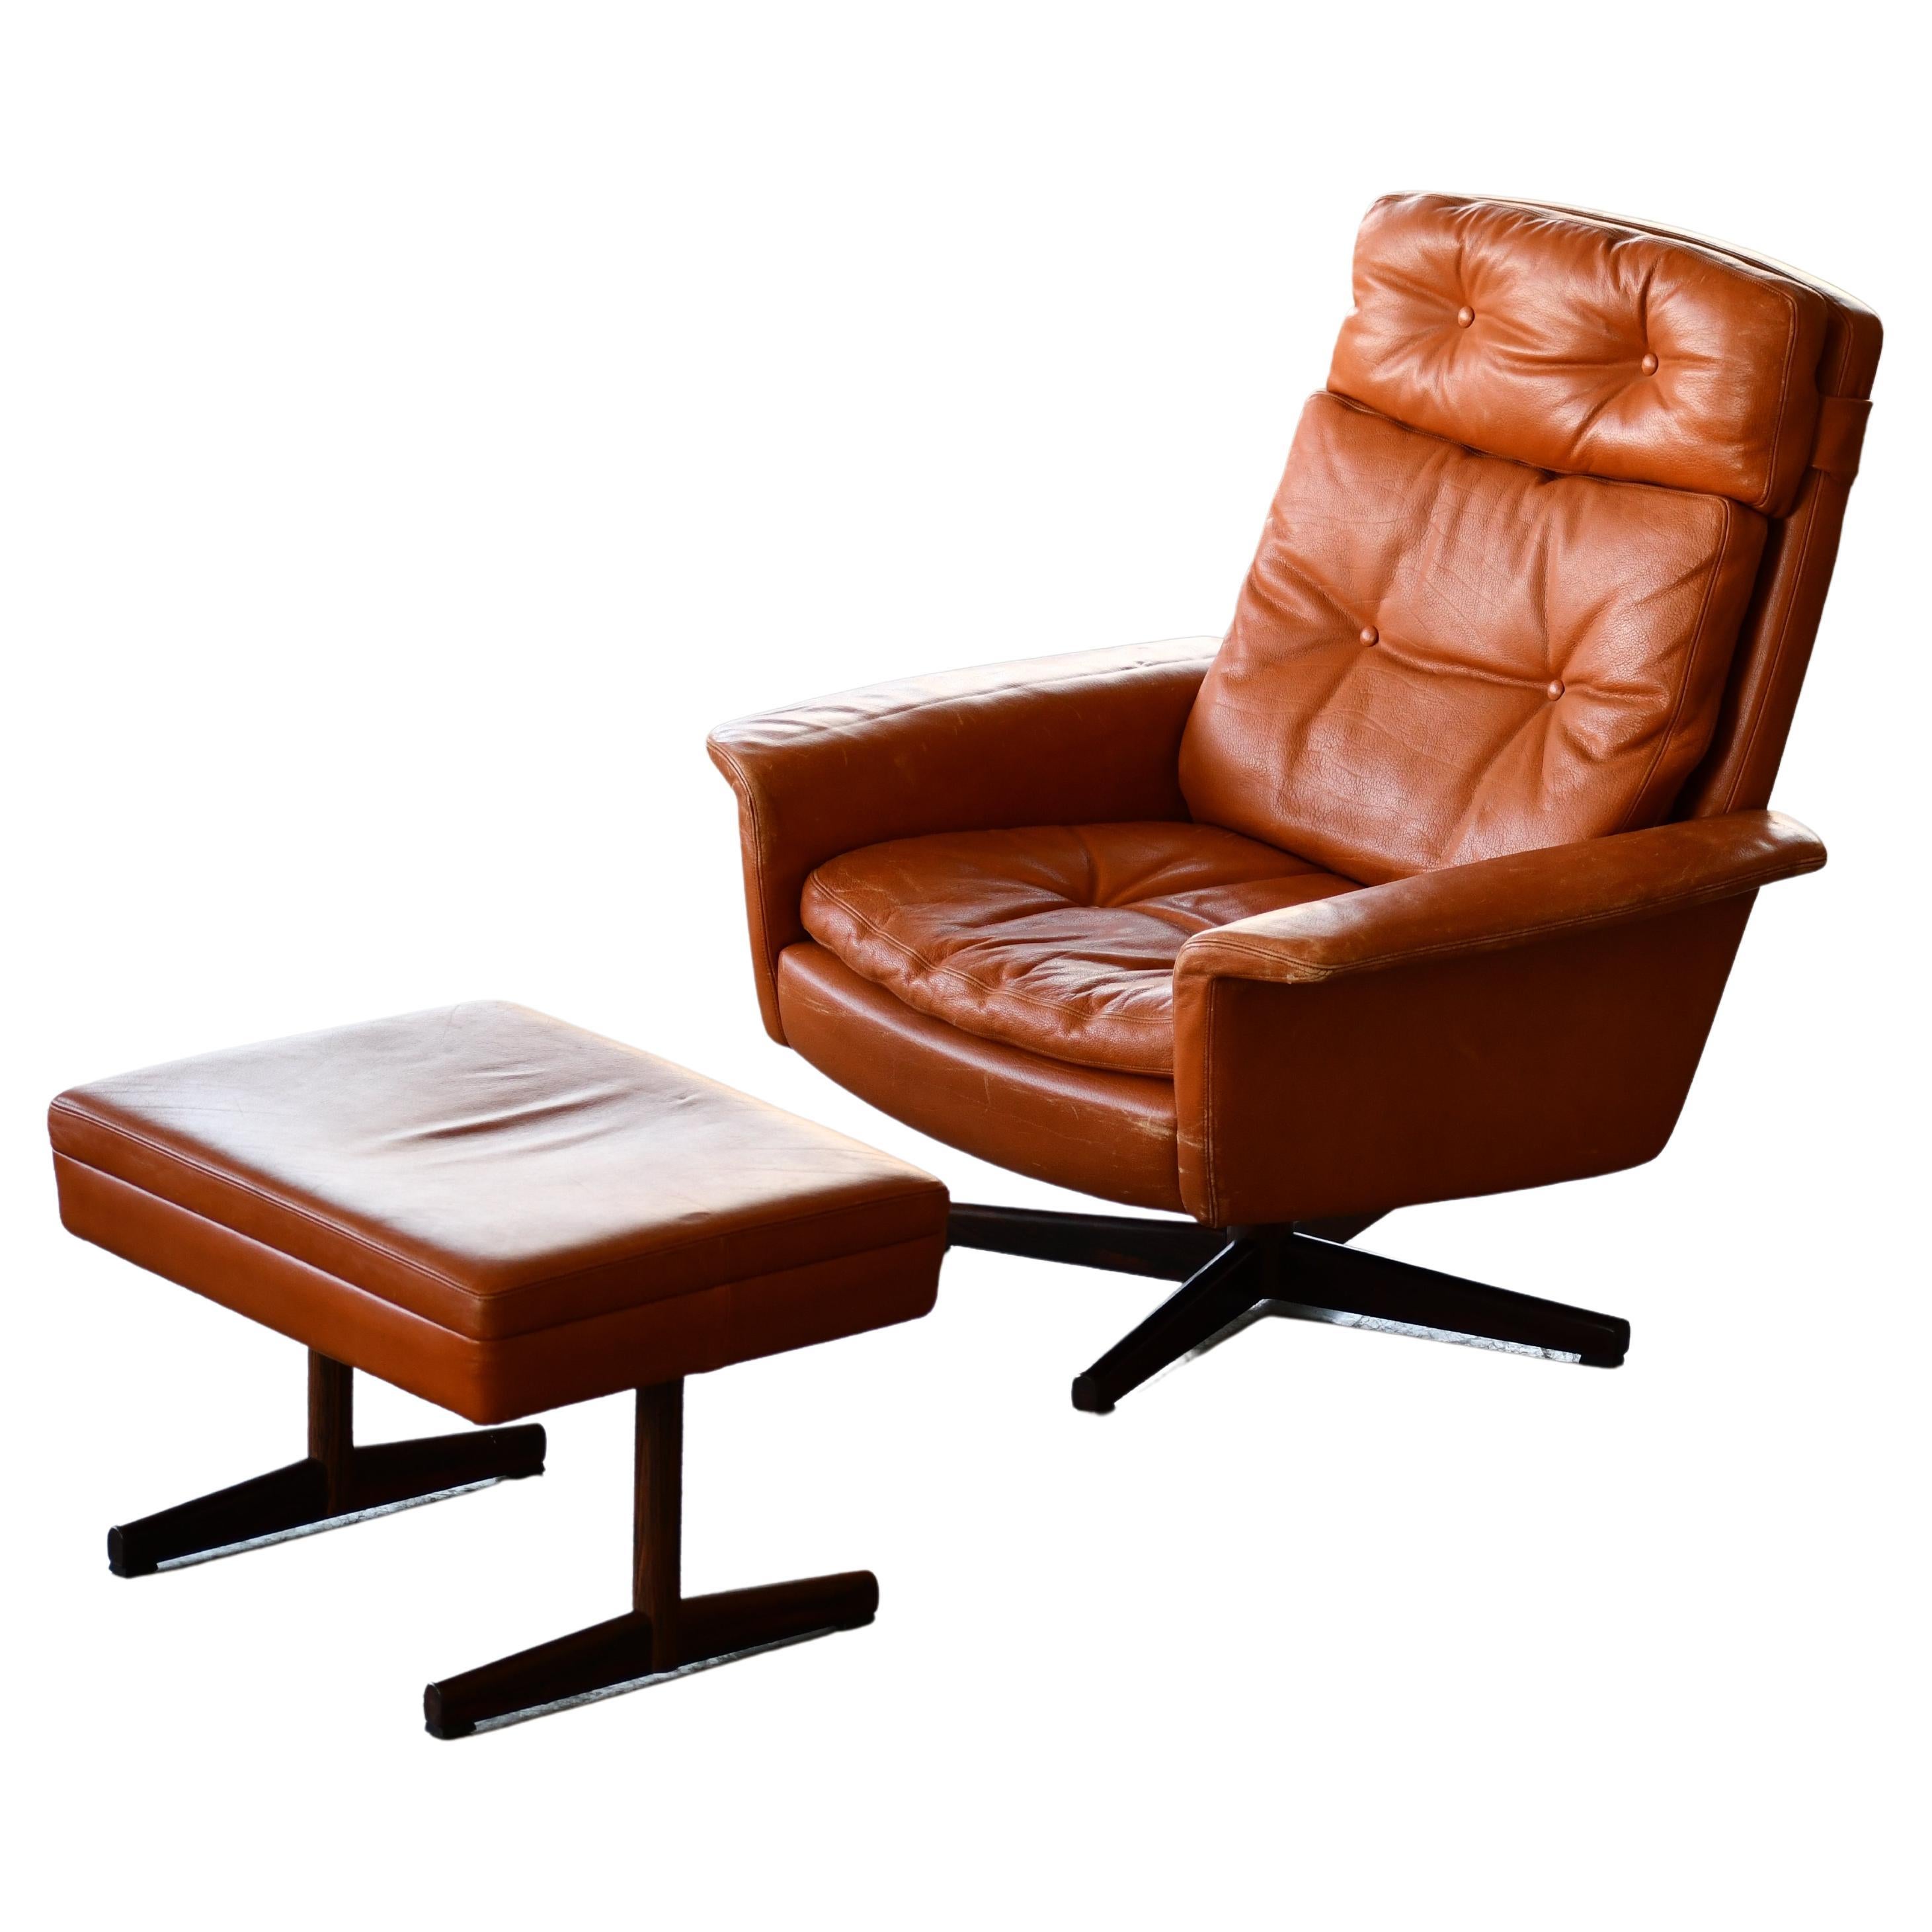 Danish High Back Swivel Lounge Chair with Ottoman in Cognac Leather, 1970's For Sale